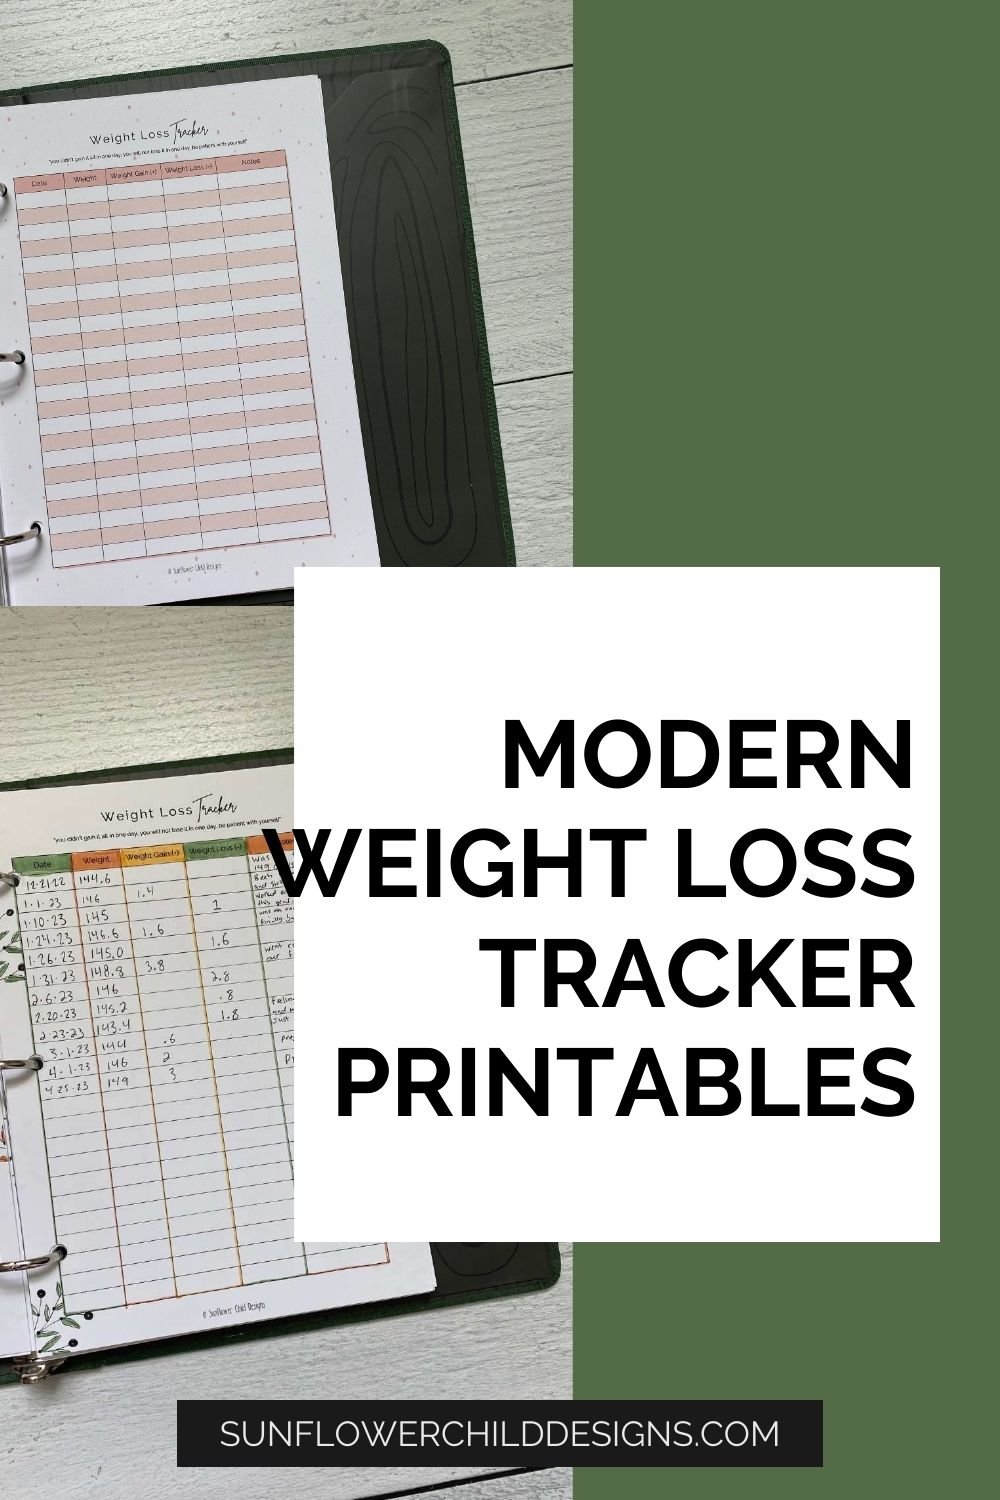 "Unlock Your Fitness Journey with this Chic, Modern Weight Loss Tracker Printable"